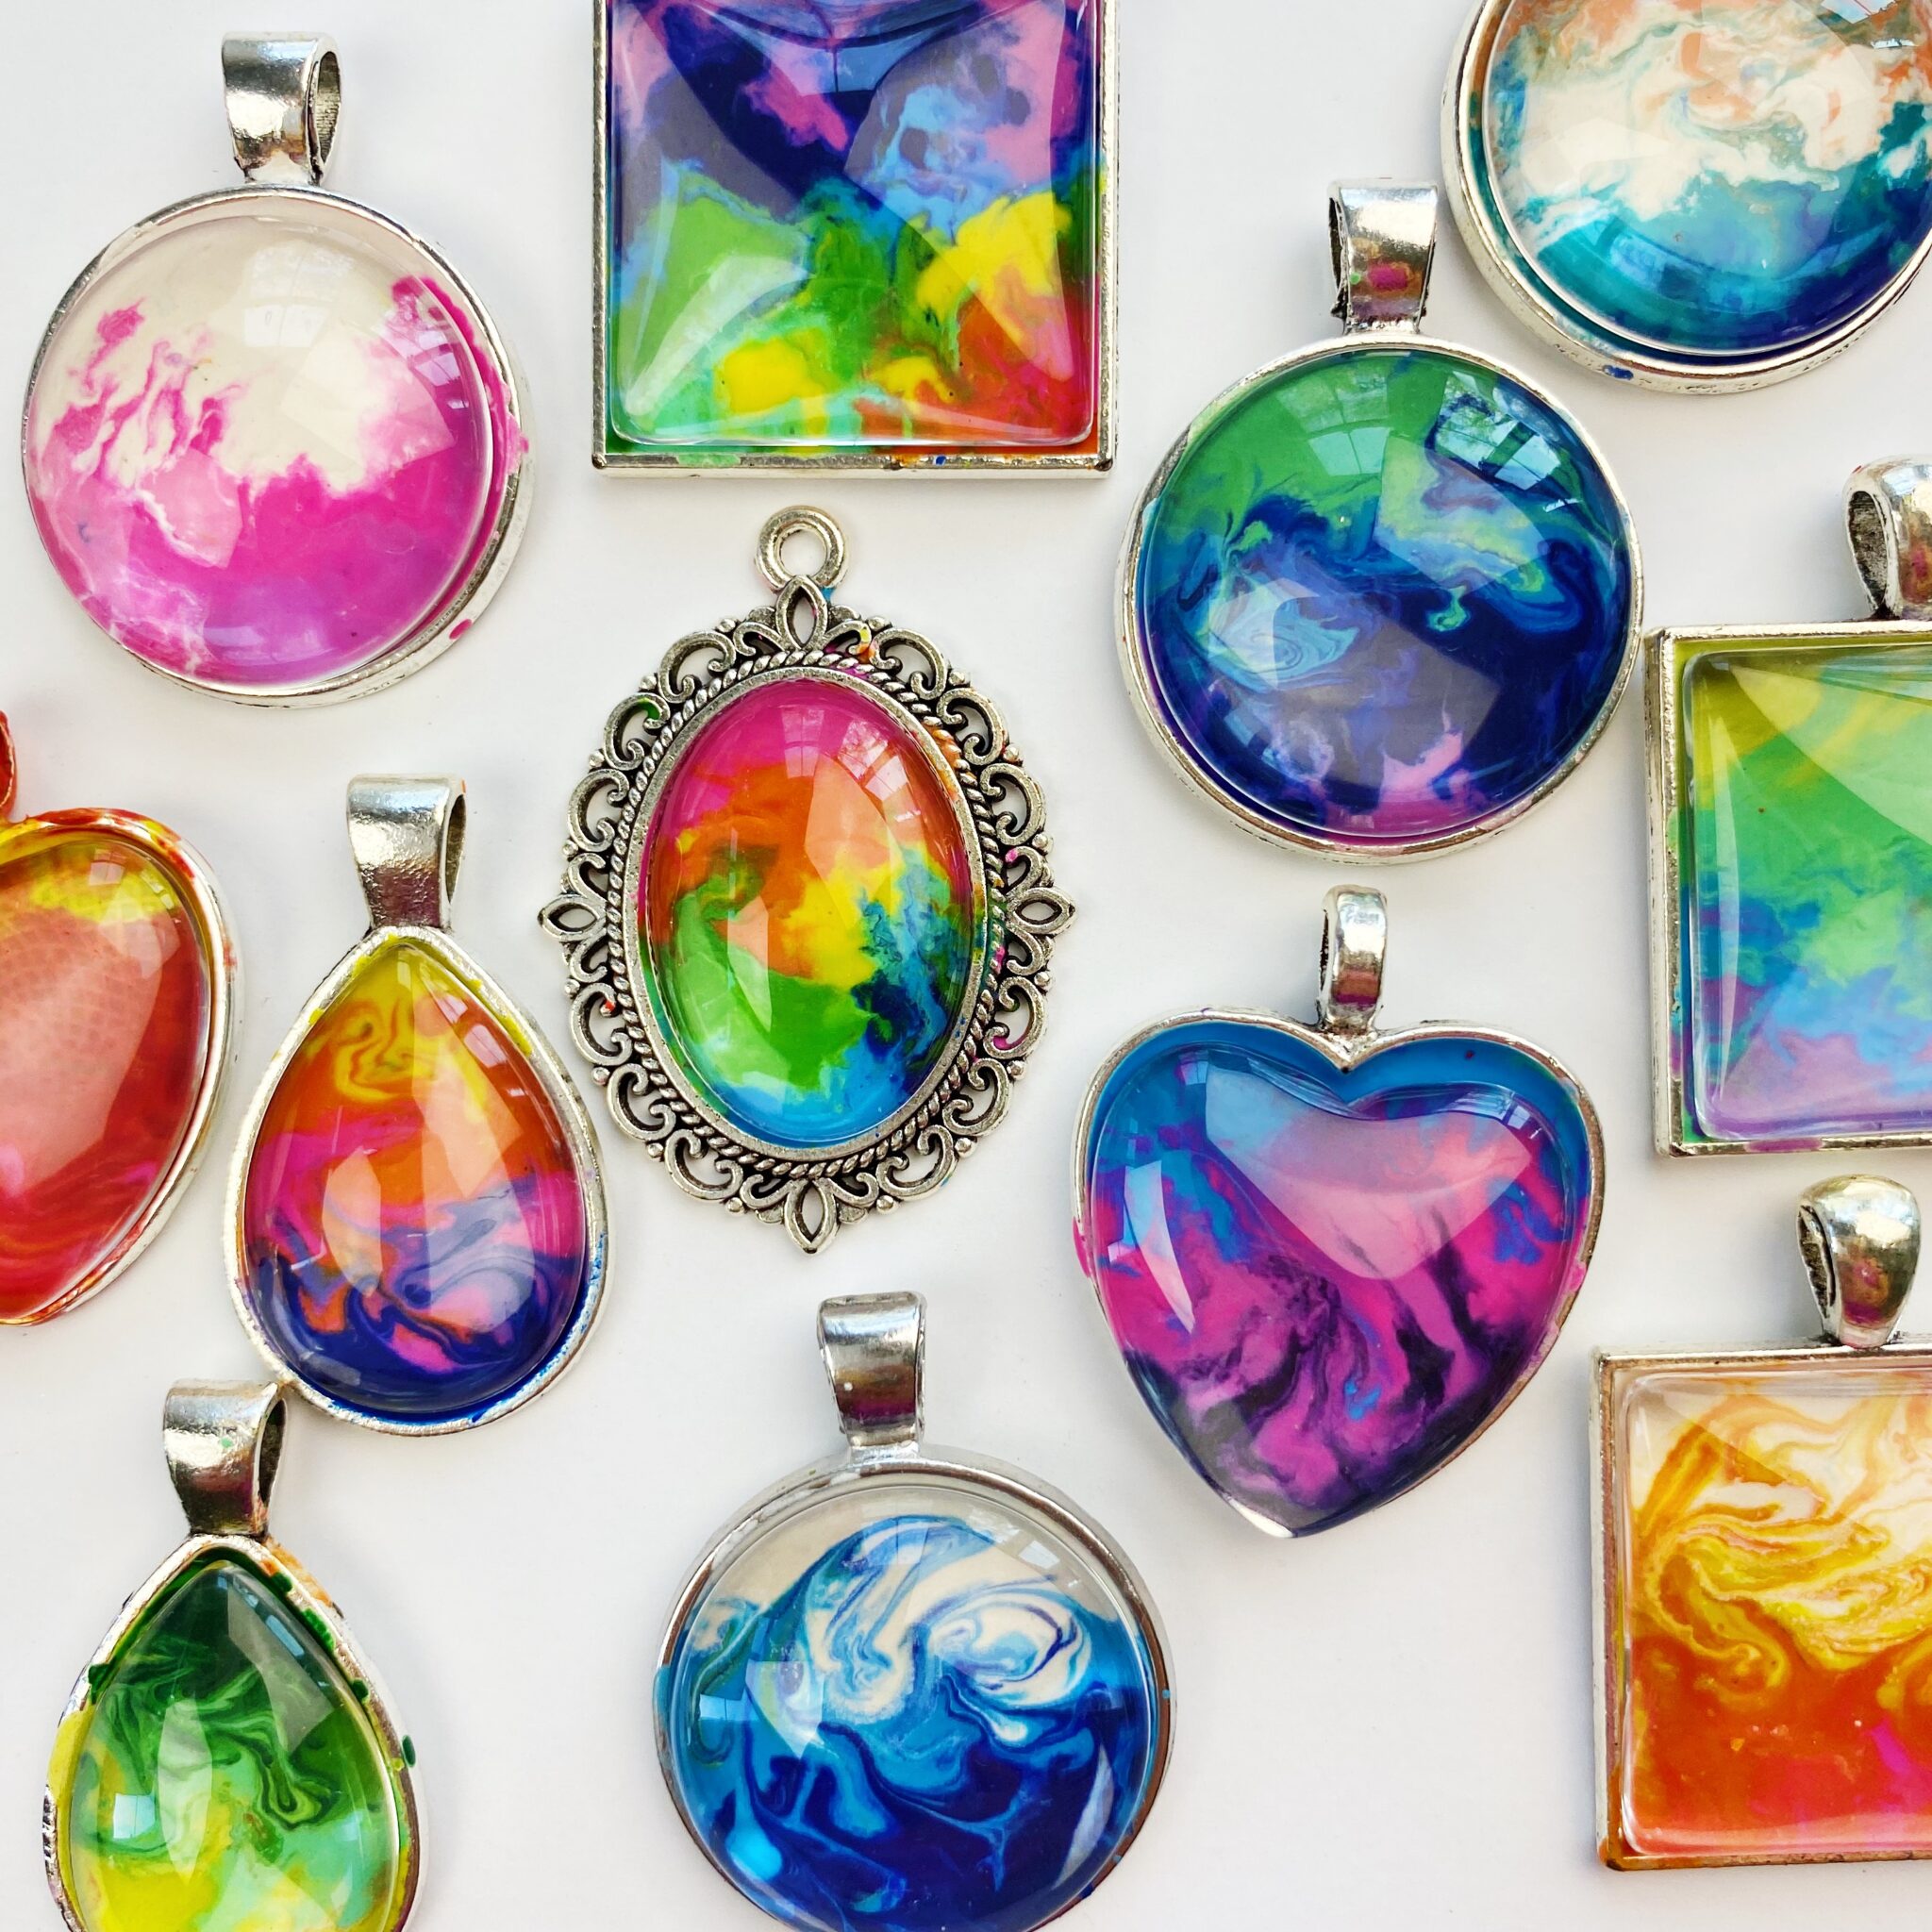 Melted crayon pendants* Photo credit to colormadehappy.com